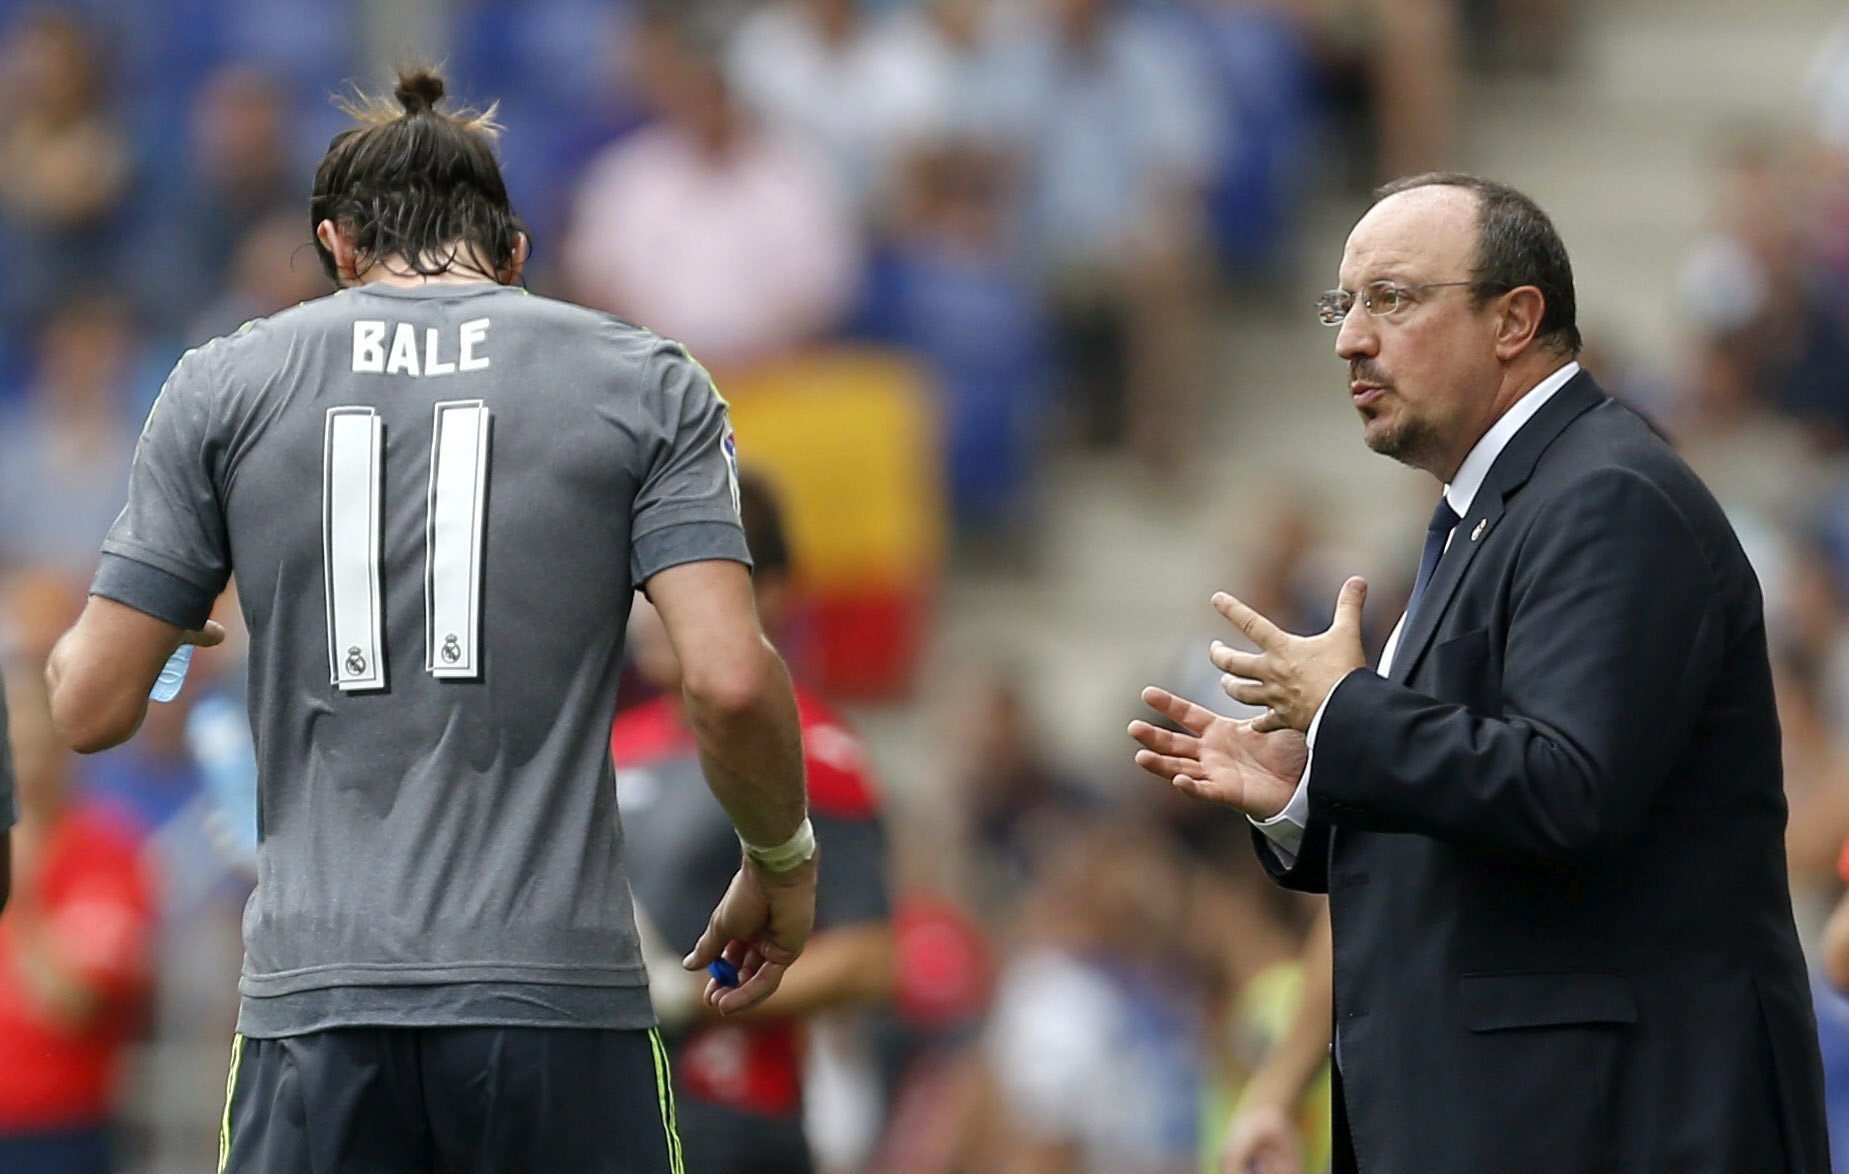 Gareth Bale has suffered a calf injury that is likely to keep him out for the next couple of weeks.